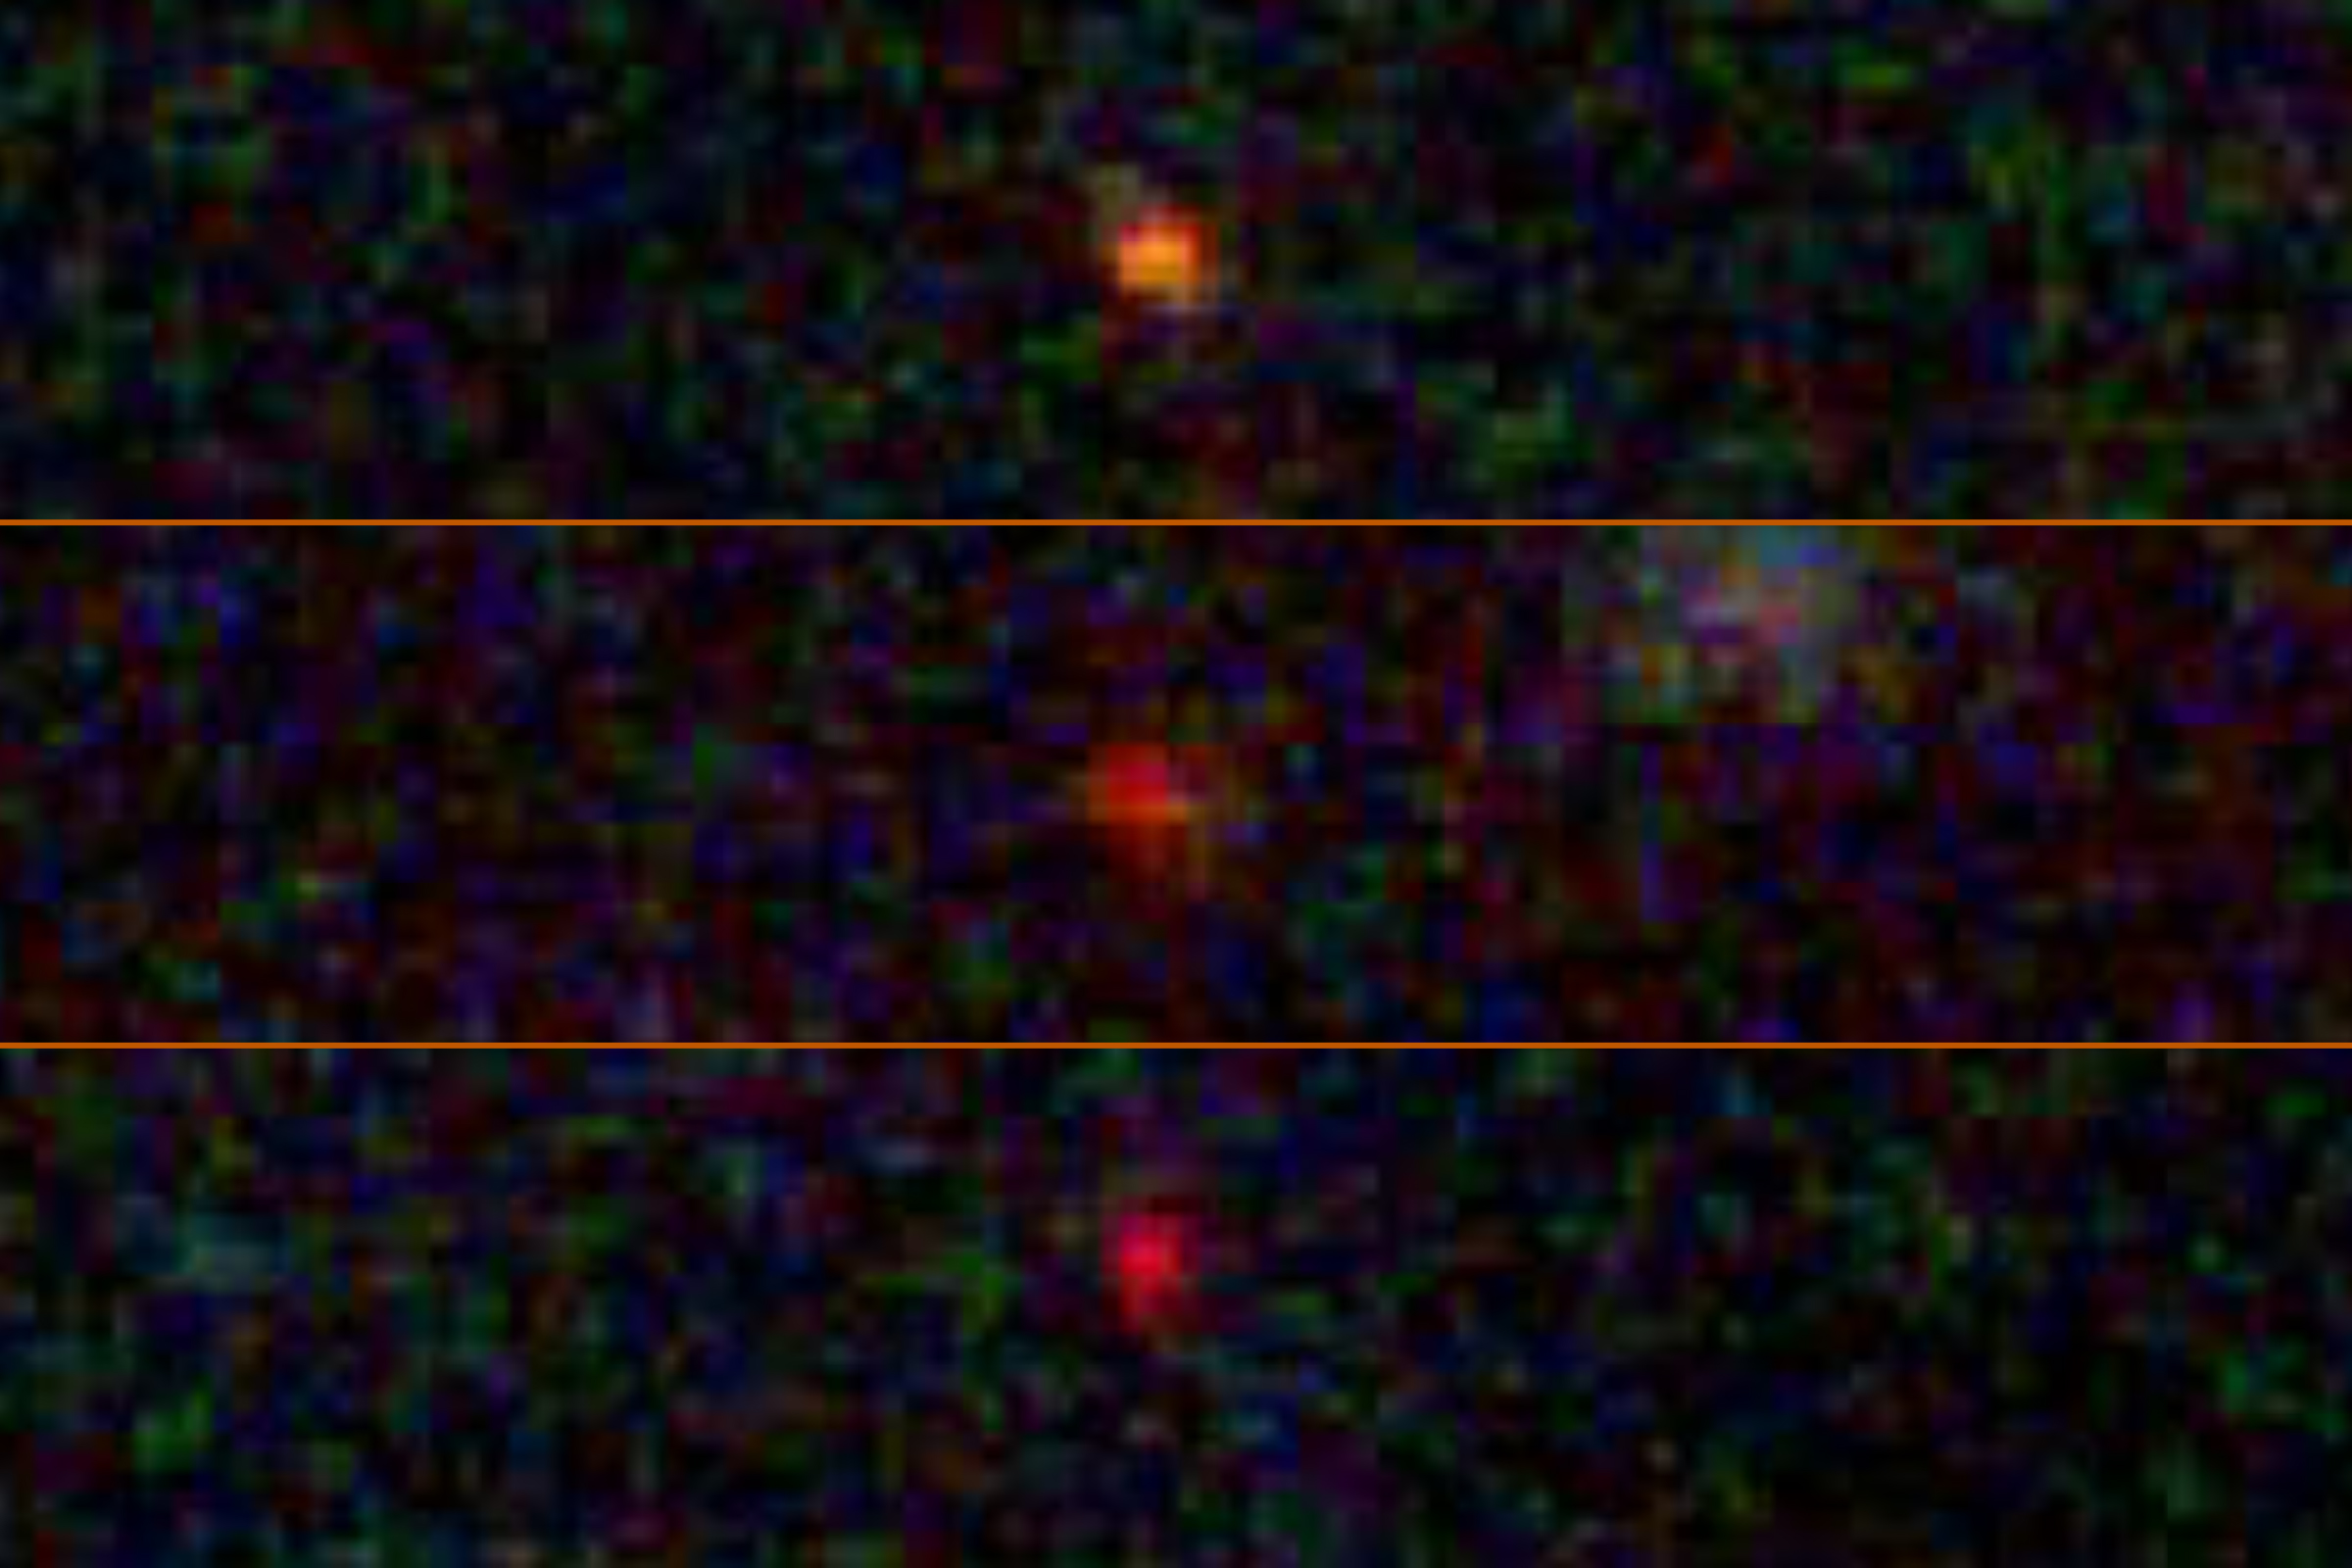 Three blurry red dots stand out in the blackness of space